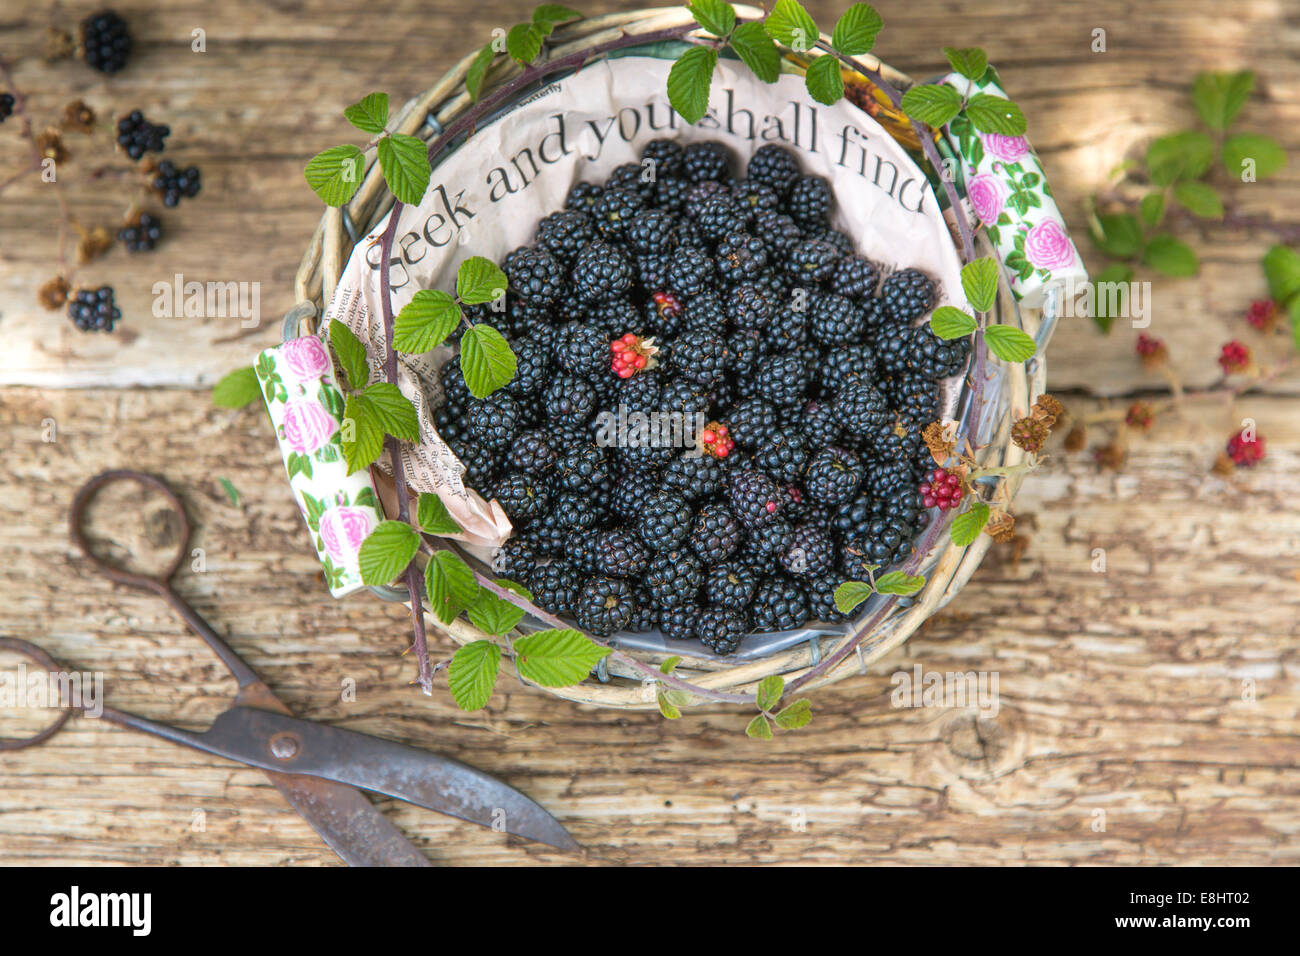 seek  and you shall find, blackberries in paper lined basket against rustic wood and vintage scissors Stock Photo